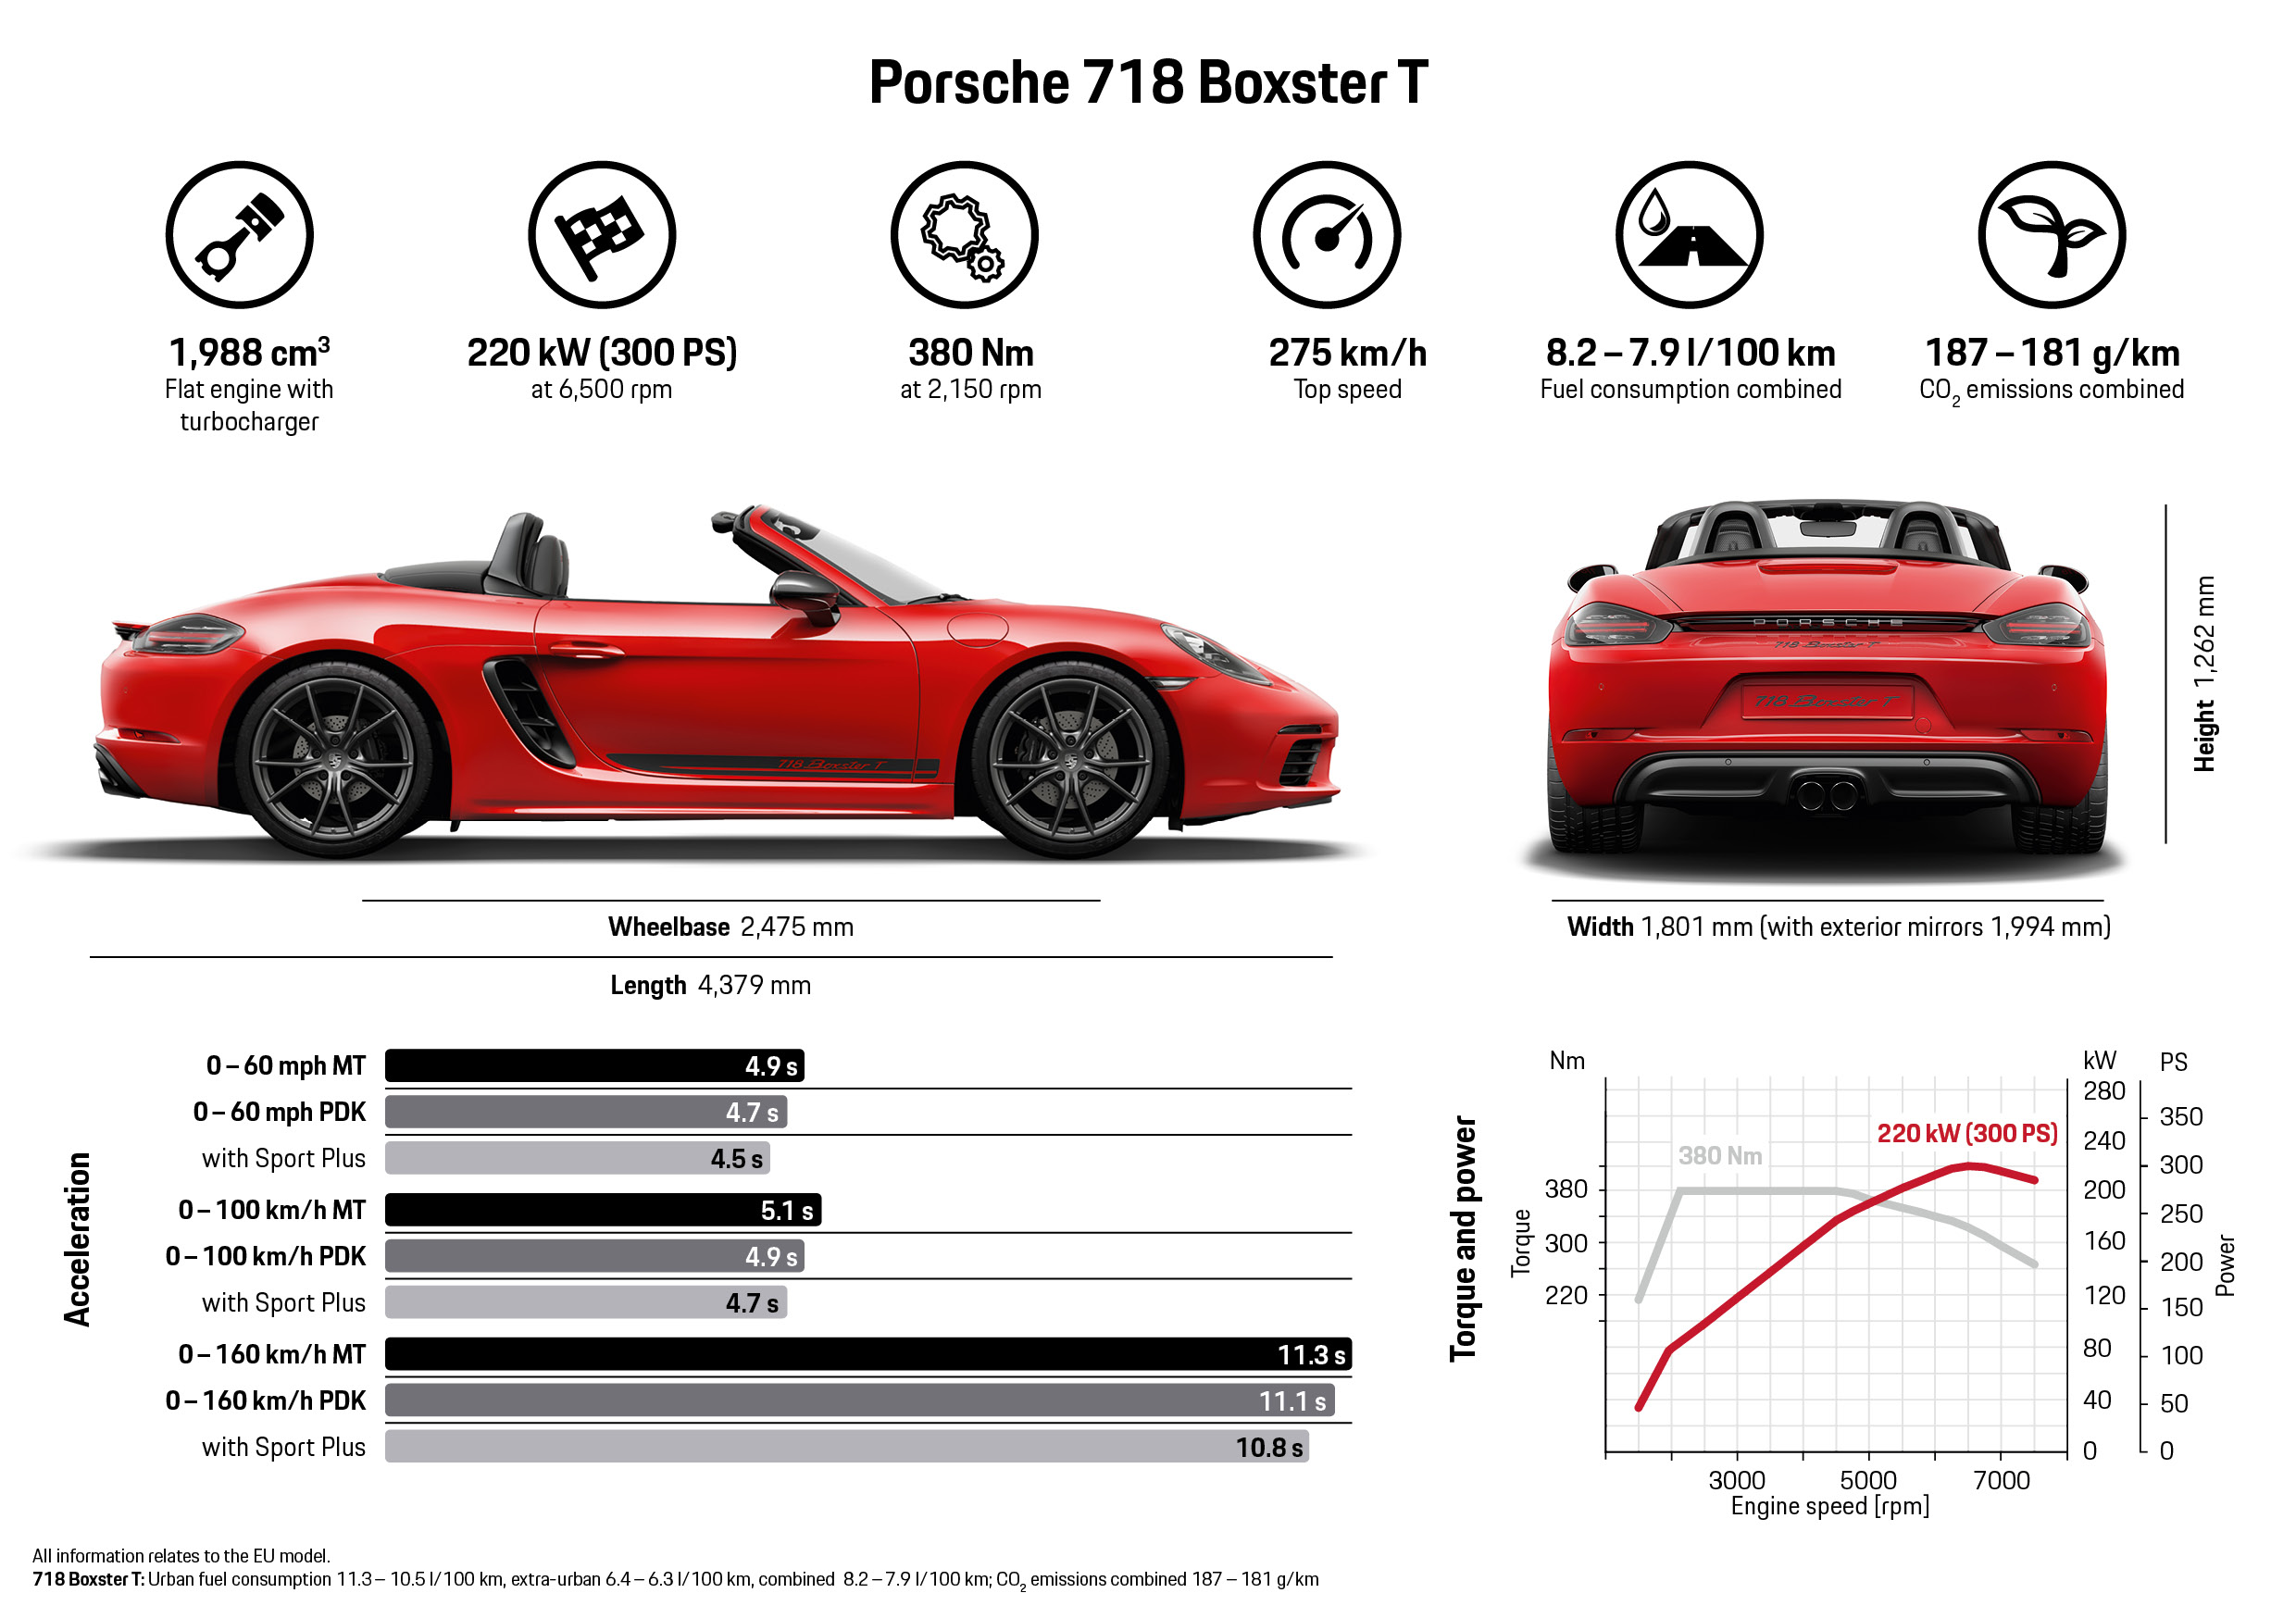 2019 Porsche 718 Boxster T Technical Wallpapers #133 of 133